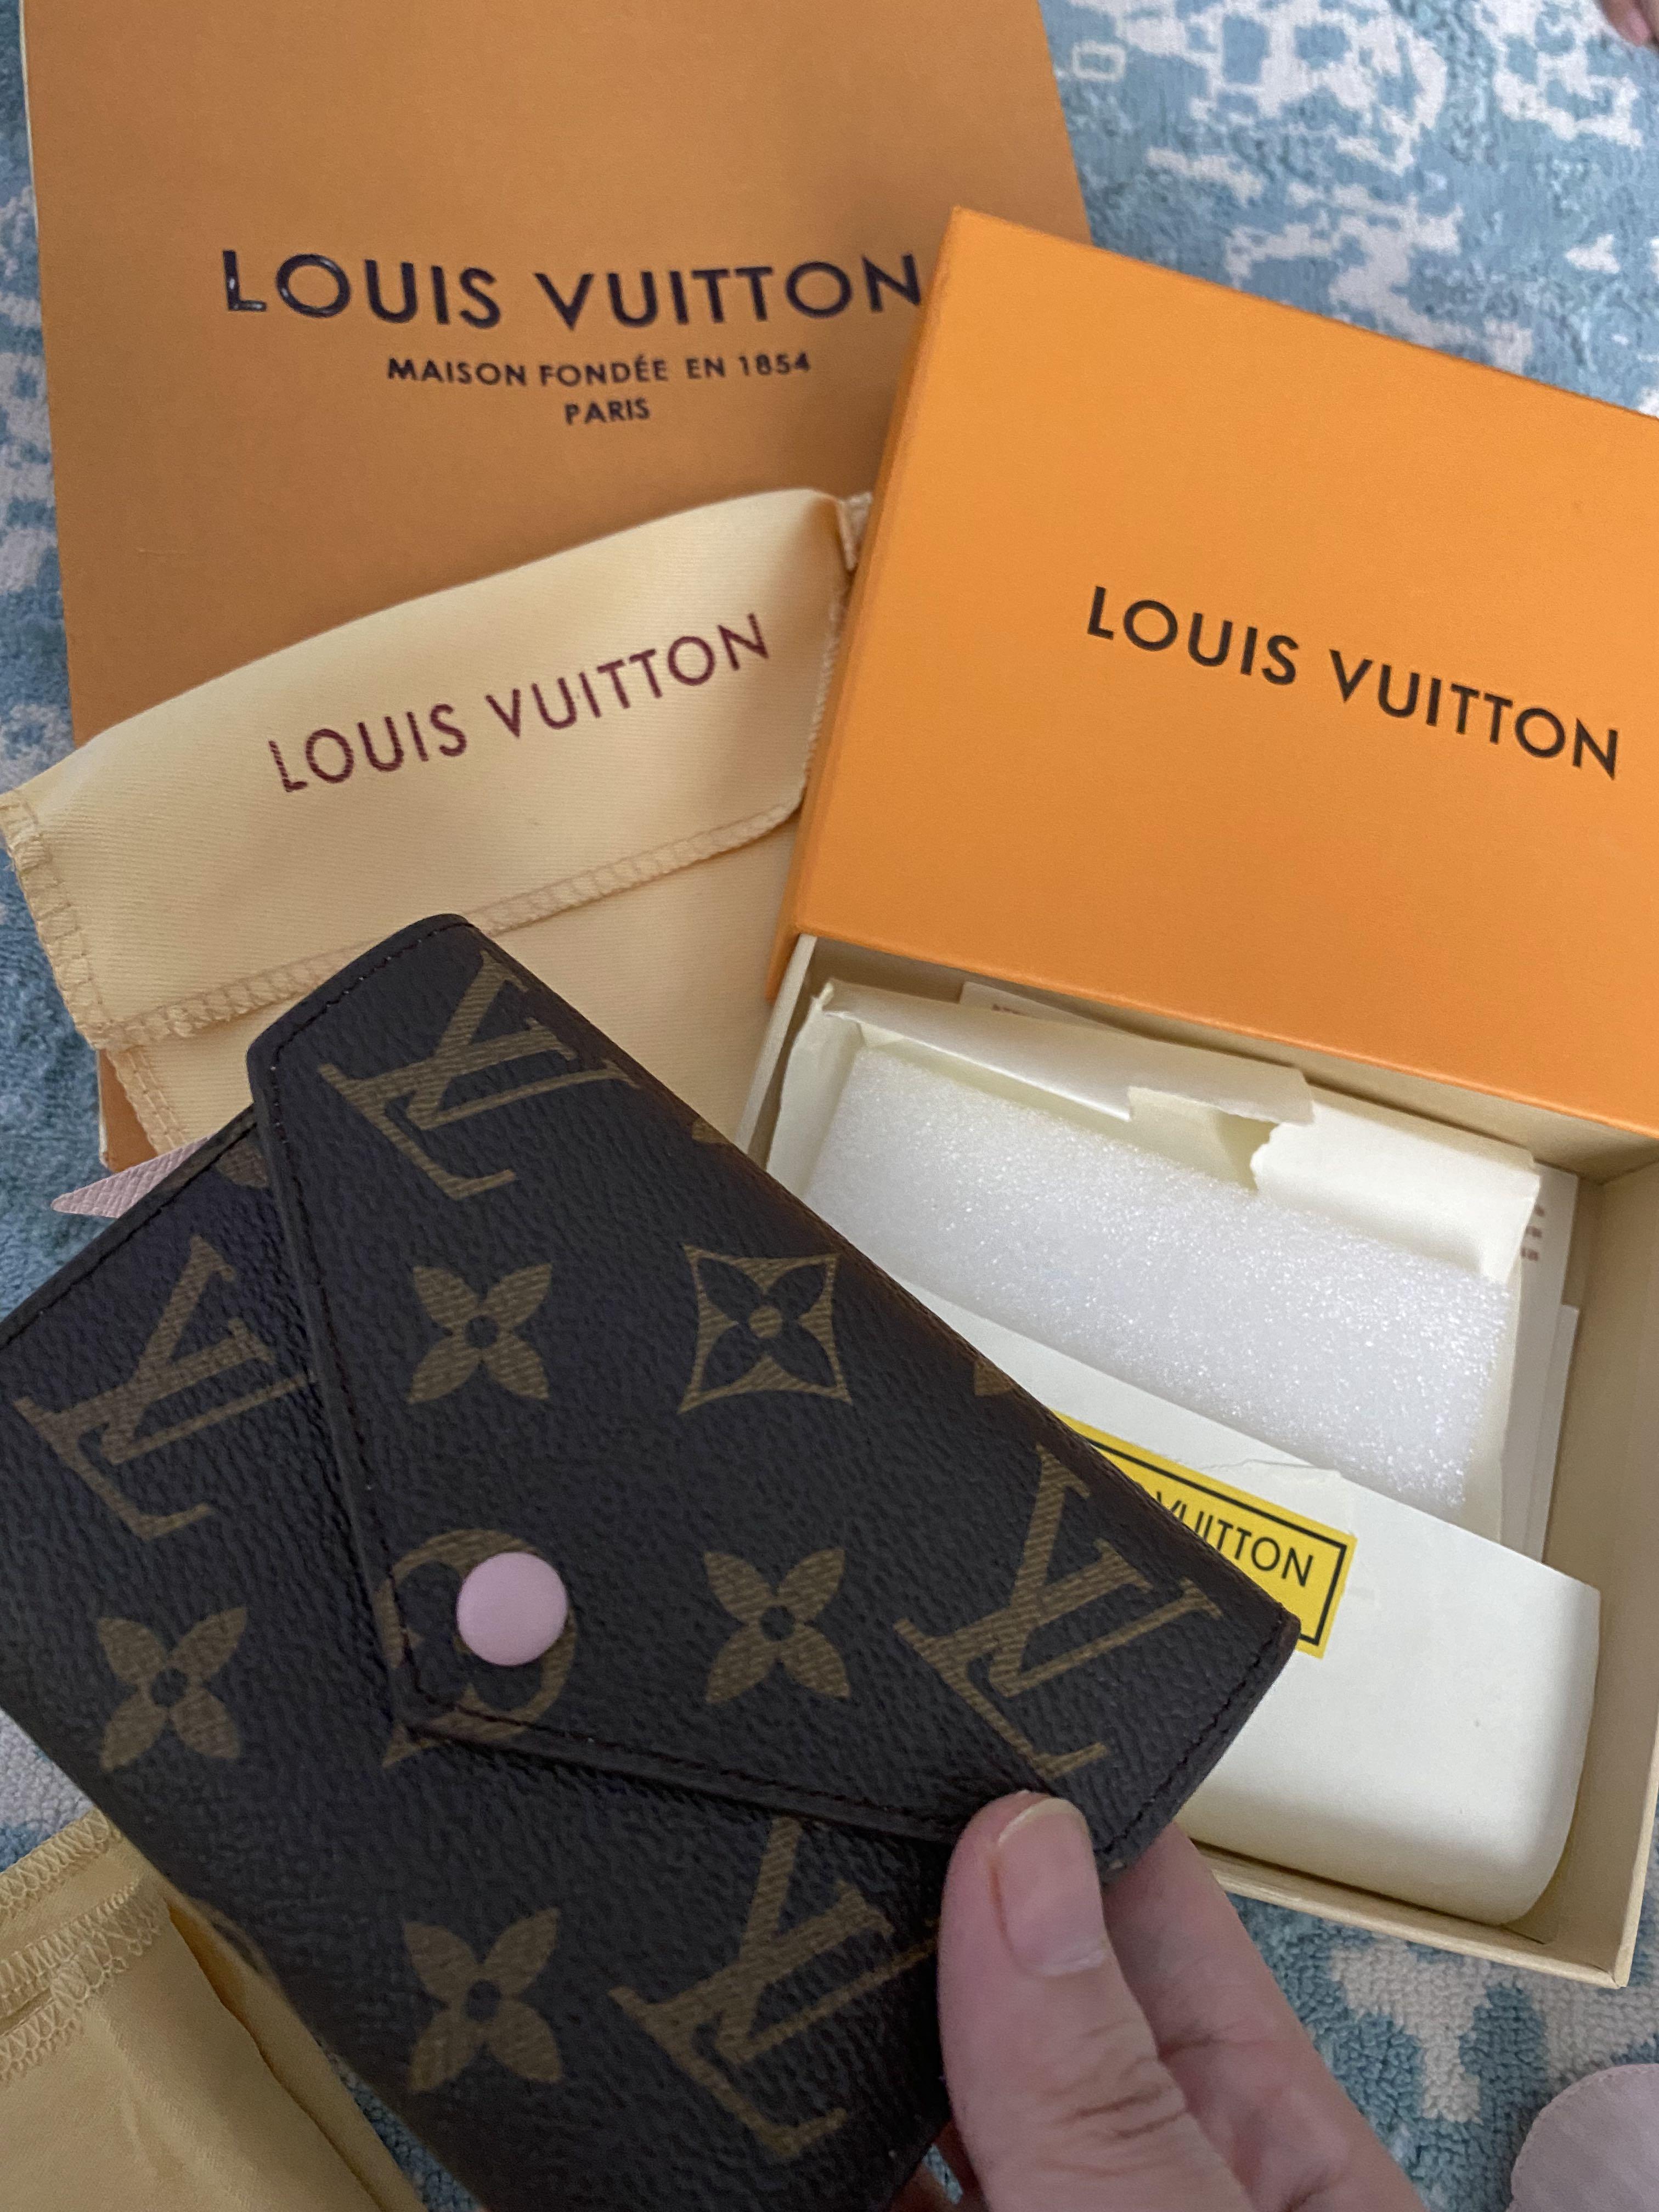 How Much Does a Louis Vuitton Purse Cost? An Easy Guide | LoveToKnow